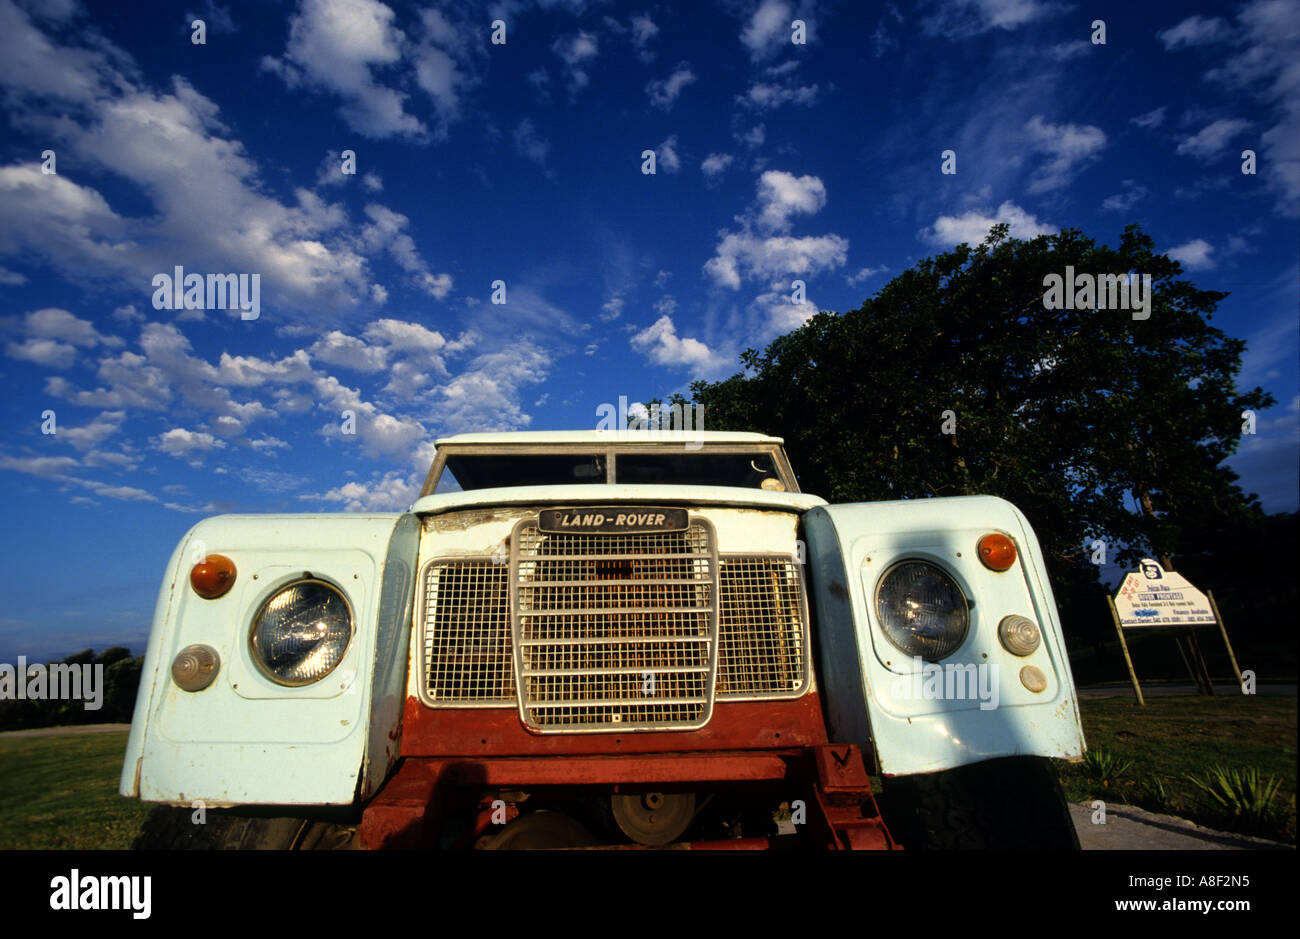 The front of a vintage series 1 land rover can be seen in front of scudding clouds. Stock Photo